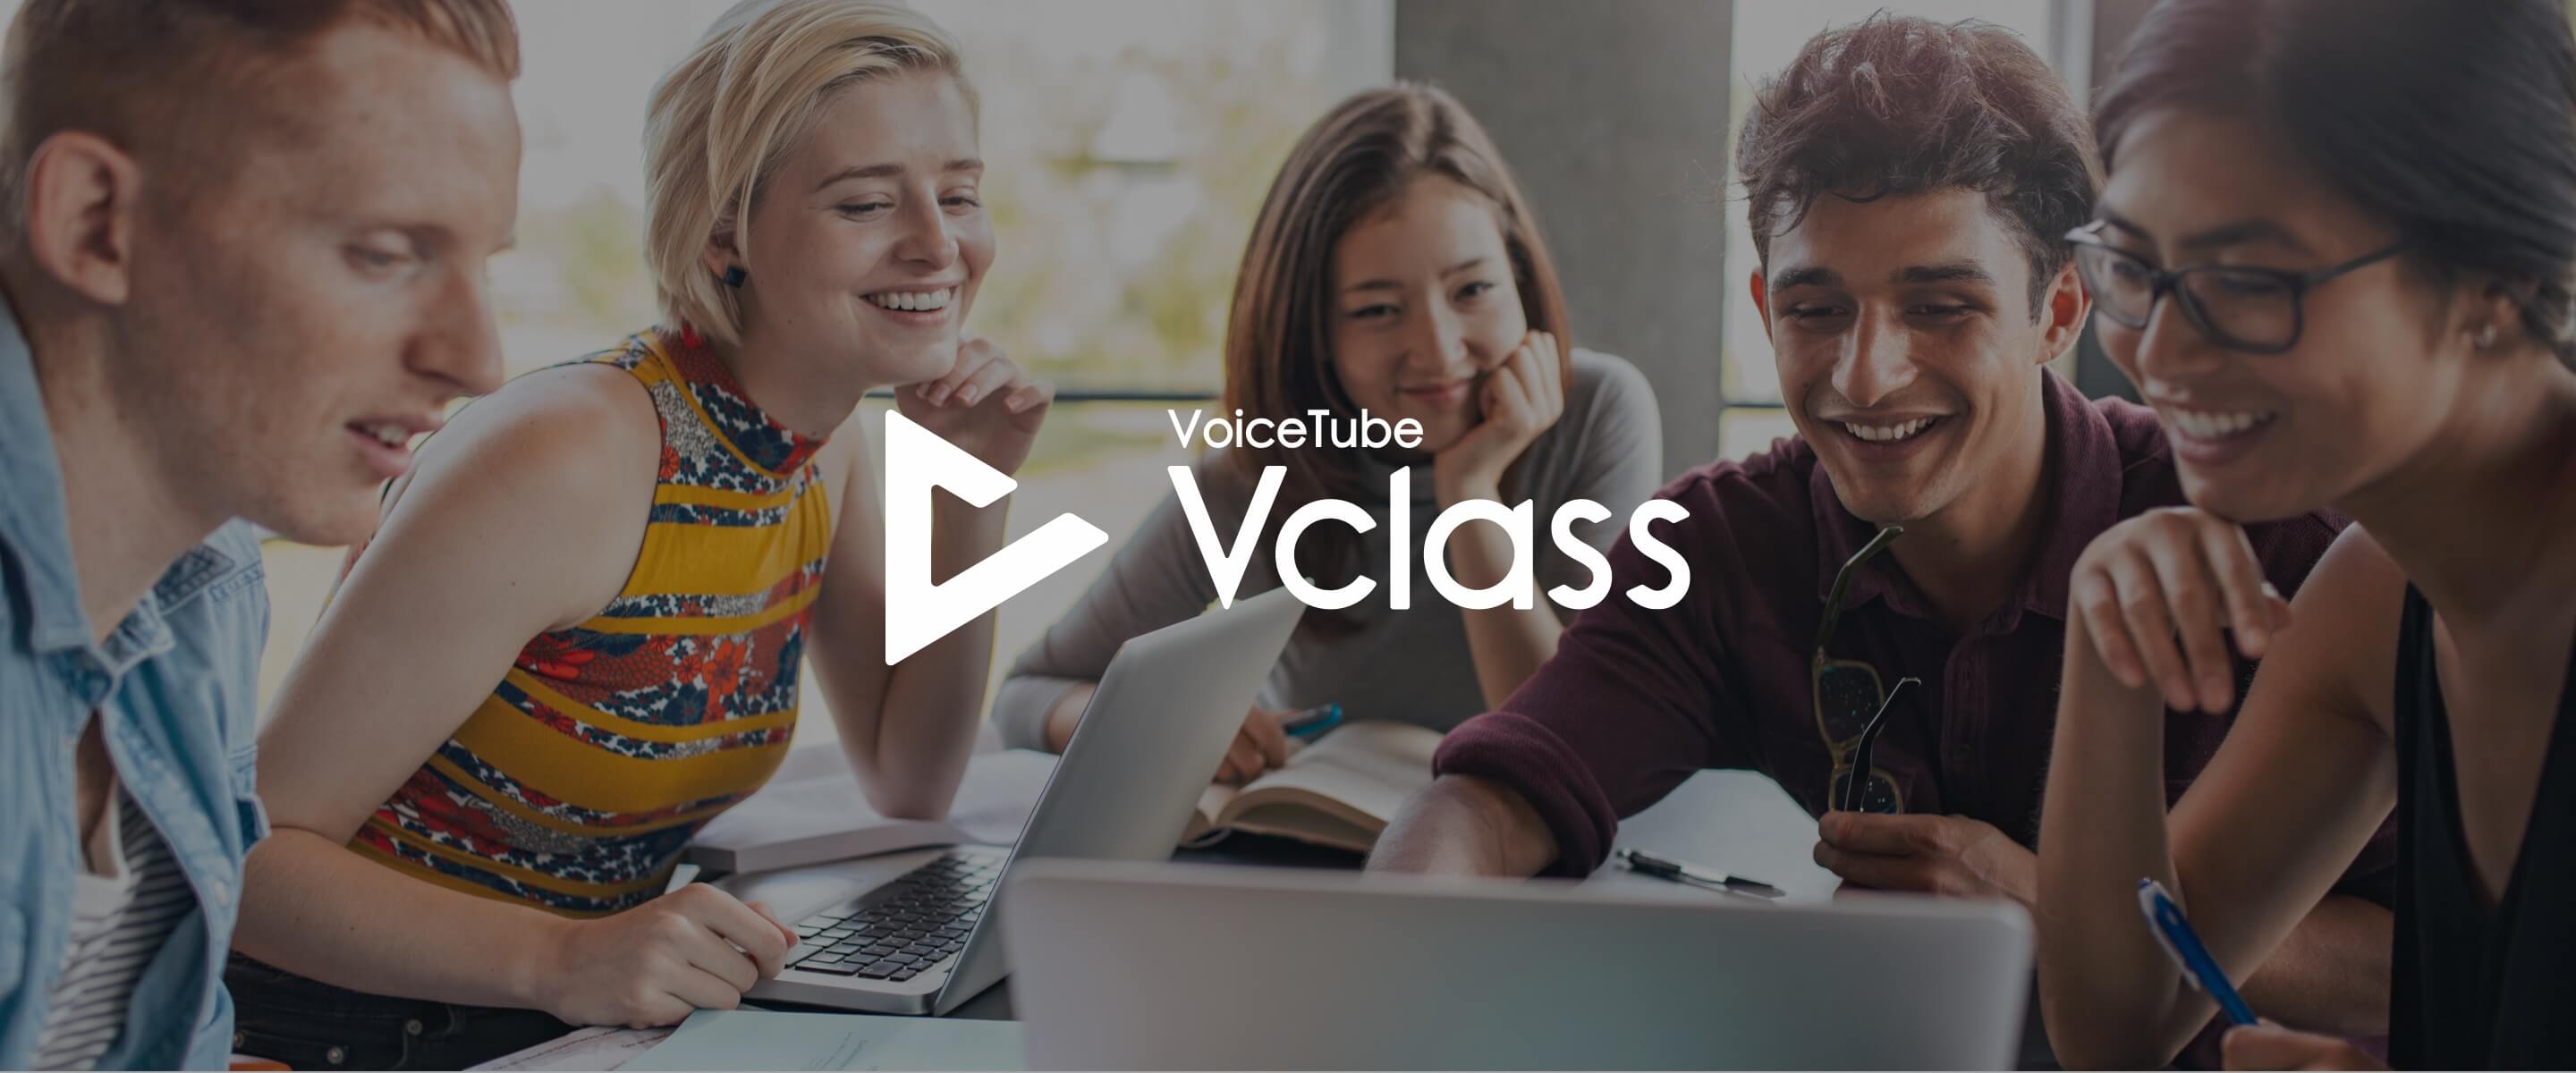 About VoiceTube Vclass